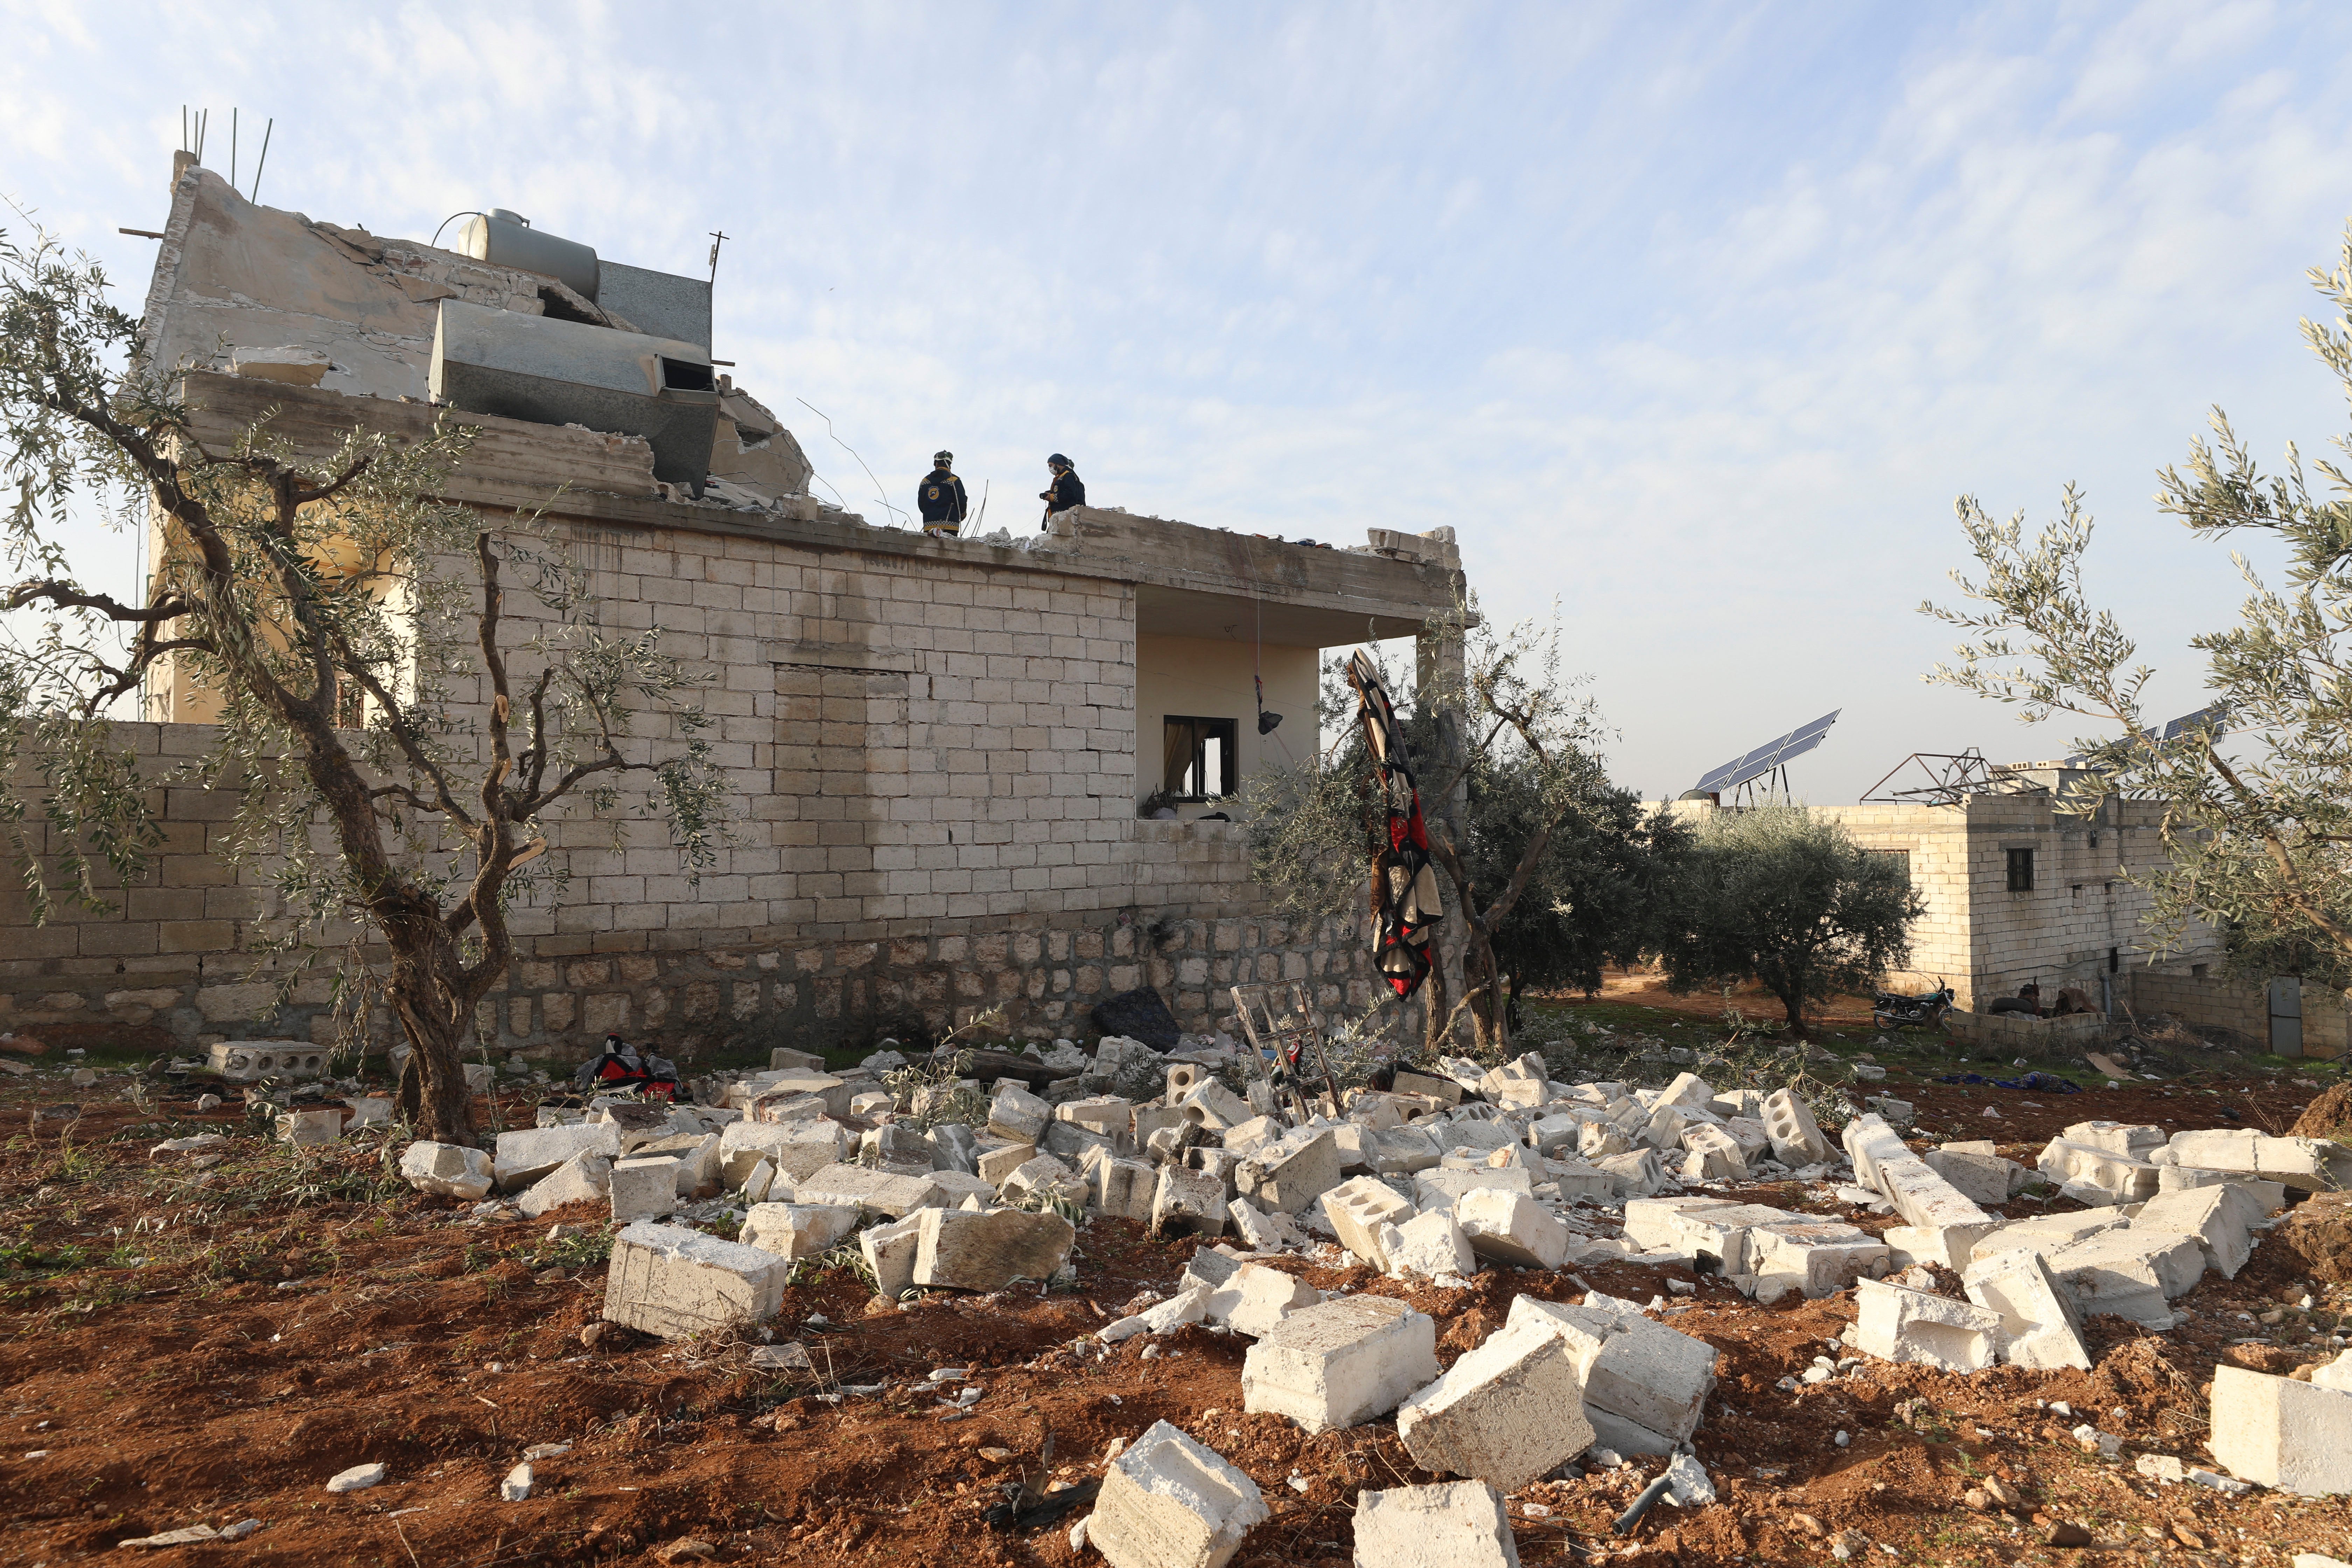 People check at a destroyed house after an operation by the U.S. military in the Syrian village of Atmeh, in Idlib province, Syria, Thursday, Feb. 3, 2022